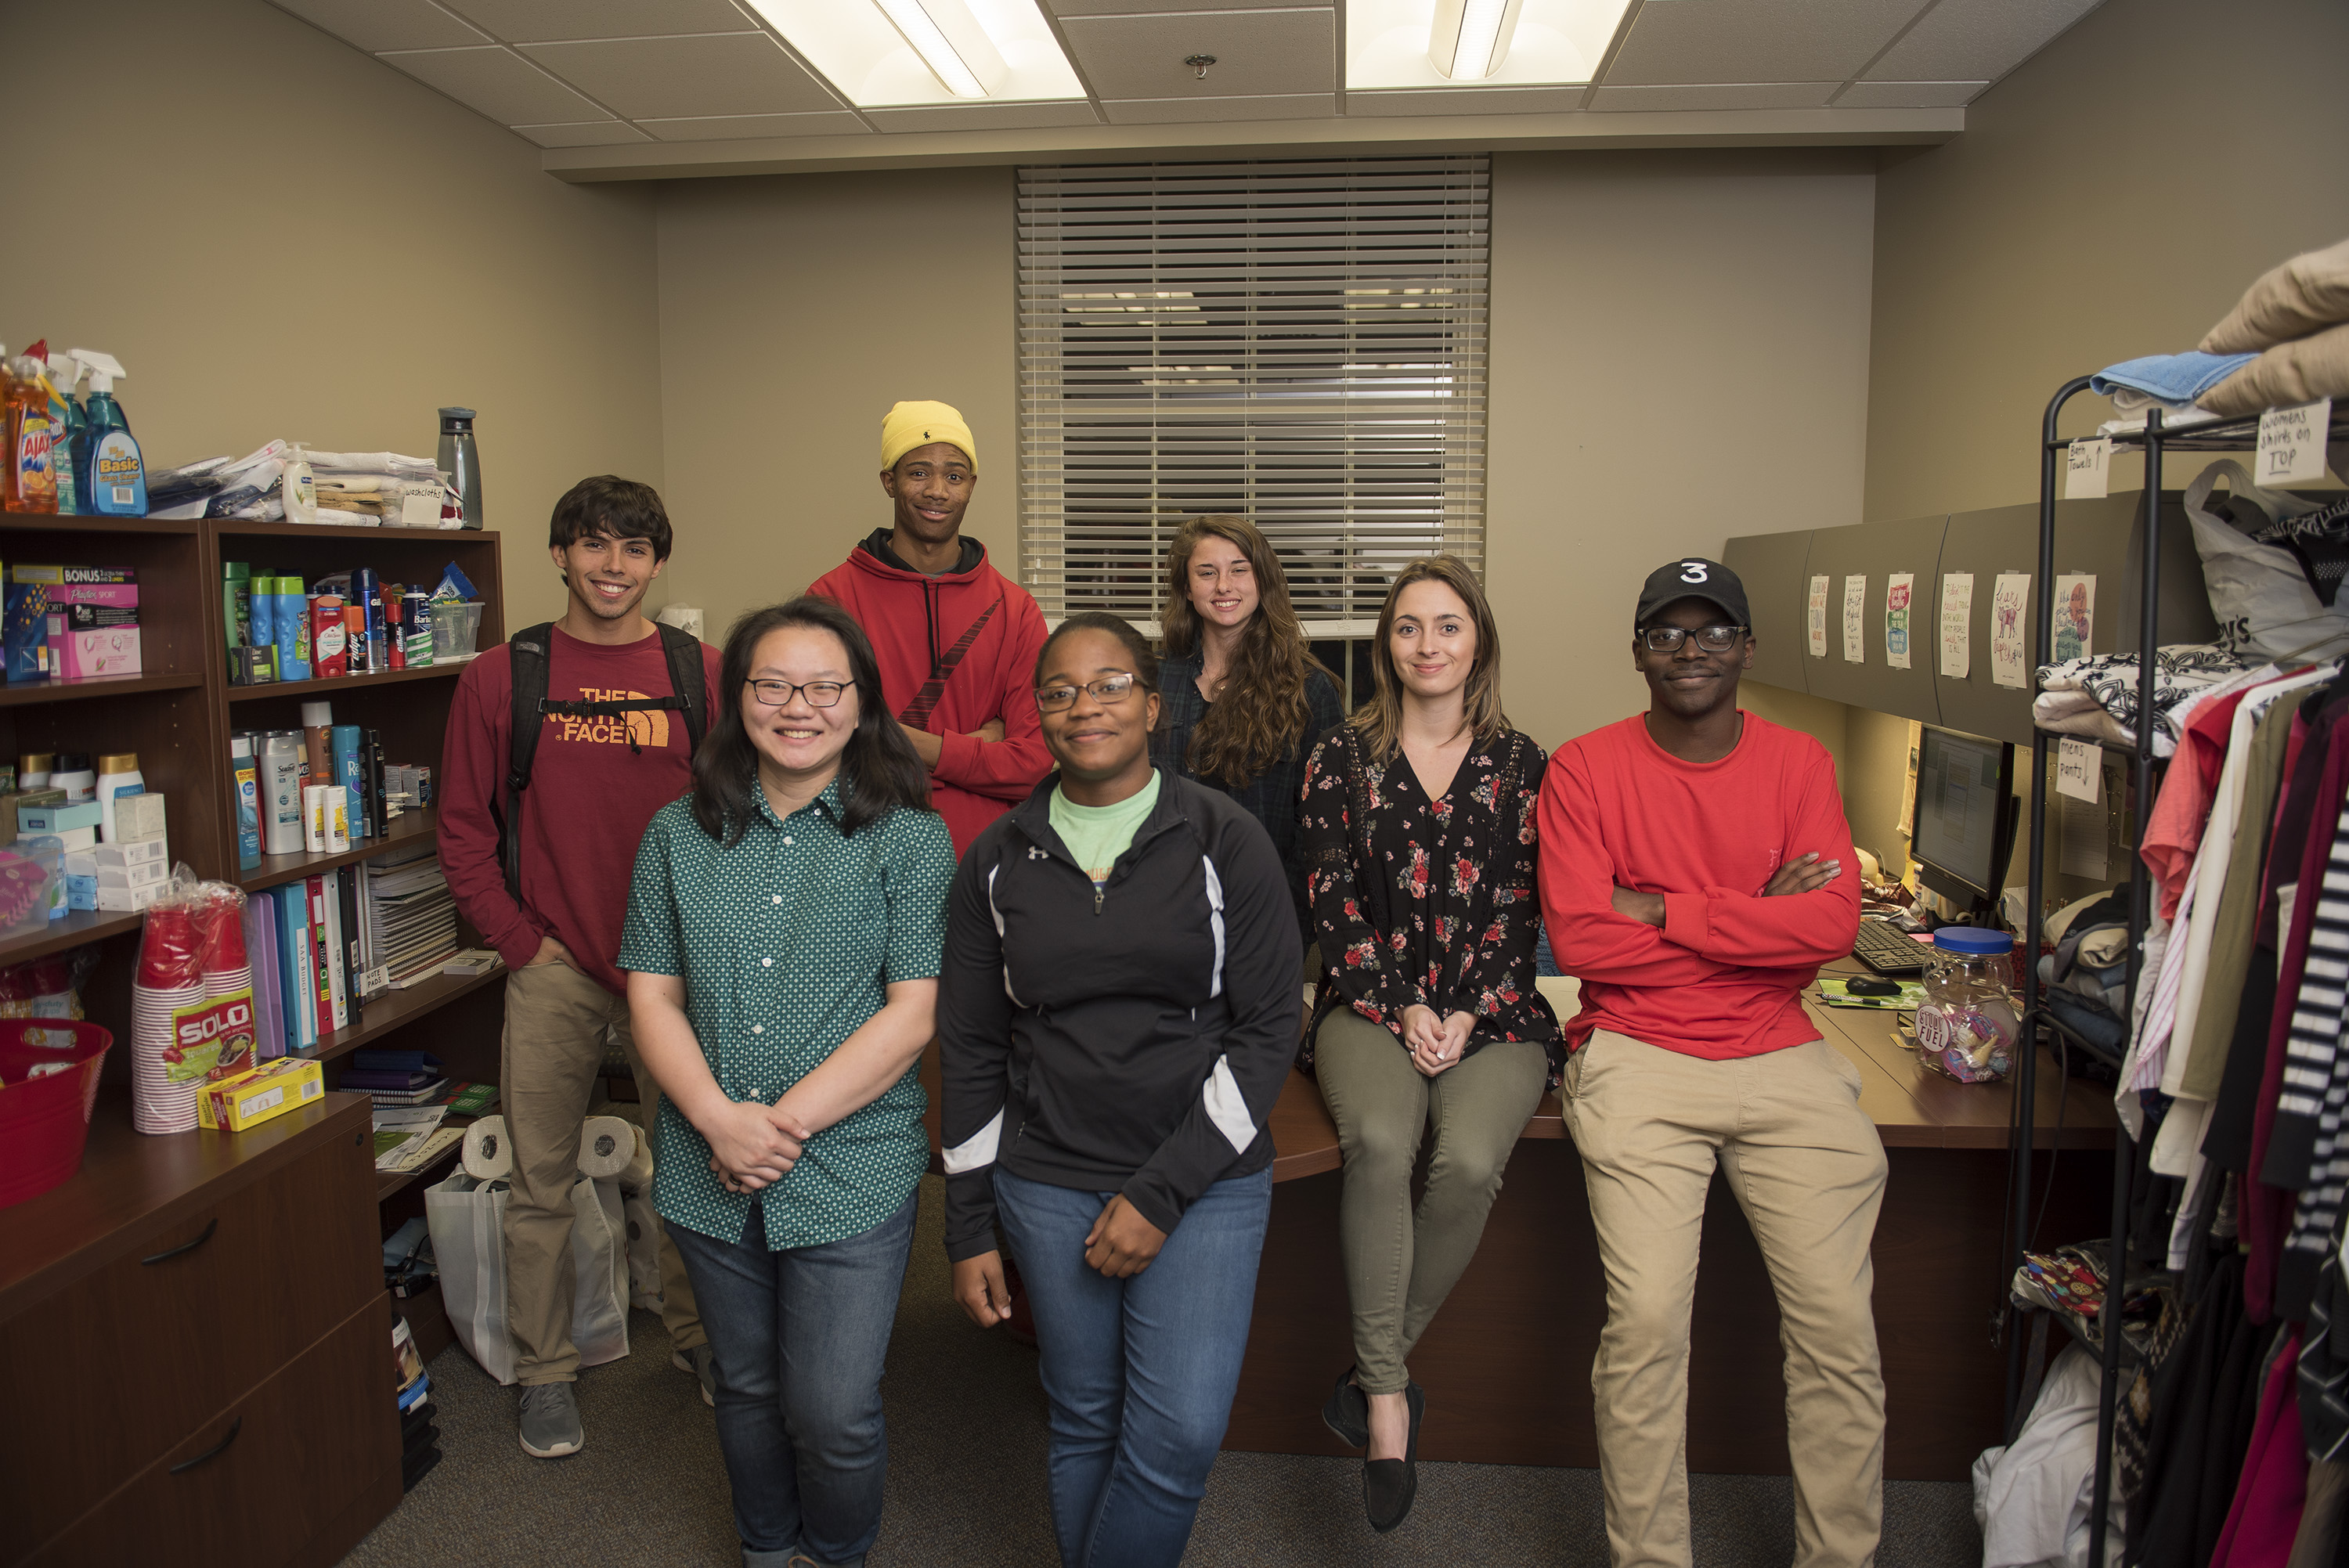 University students pose for a picture in an office filled with independent living supplies